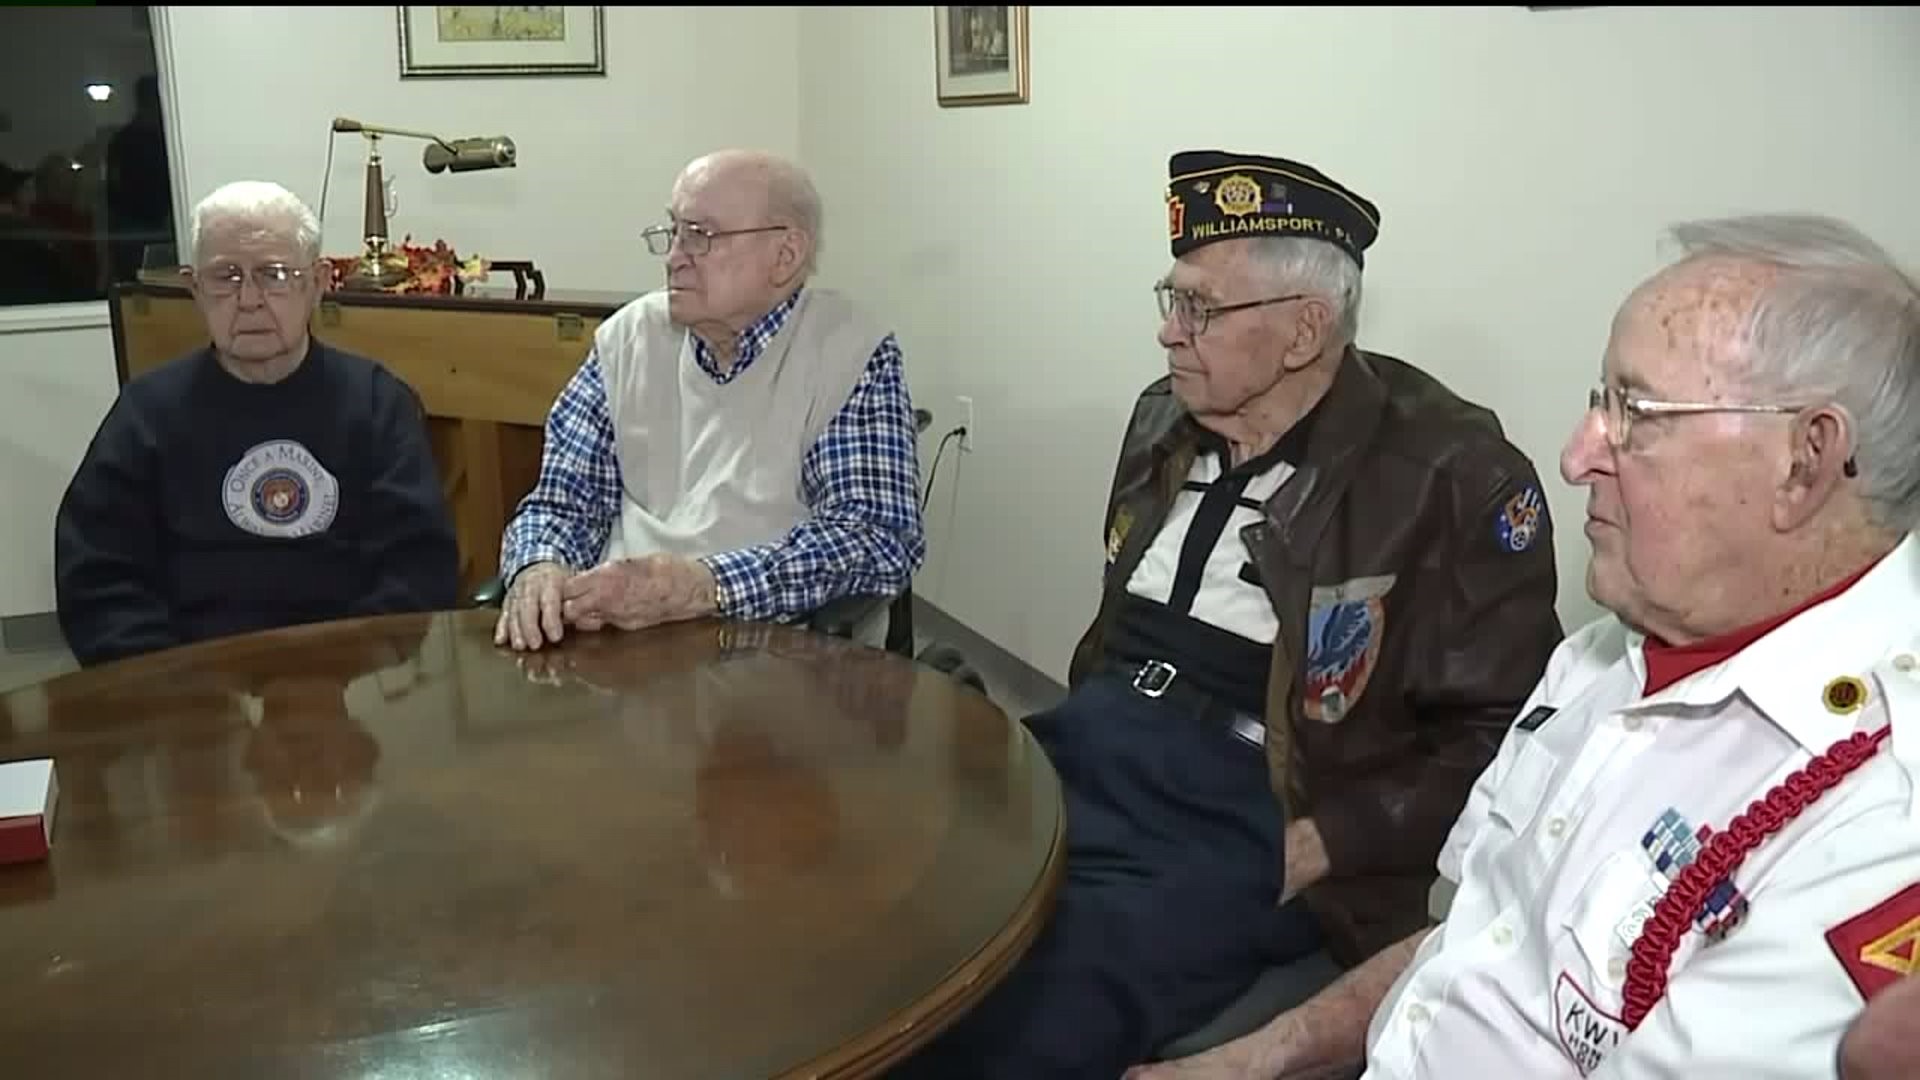 WWII Veterans Living Together at Retirement Community in Williamsport